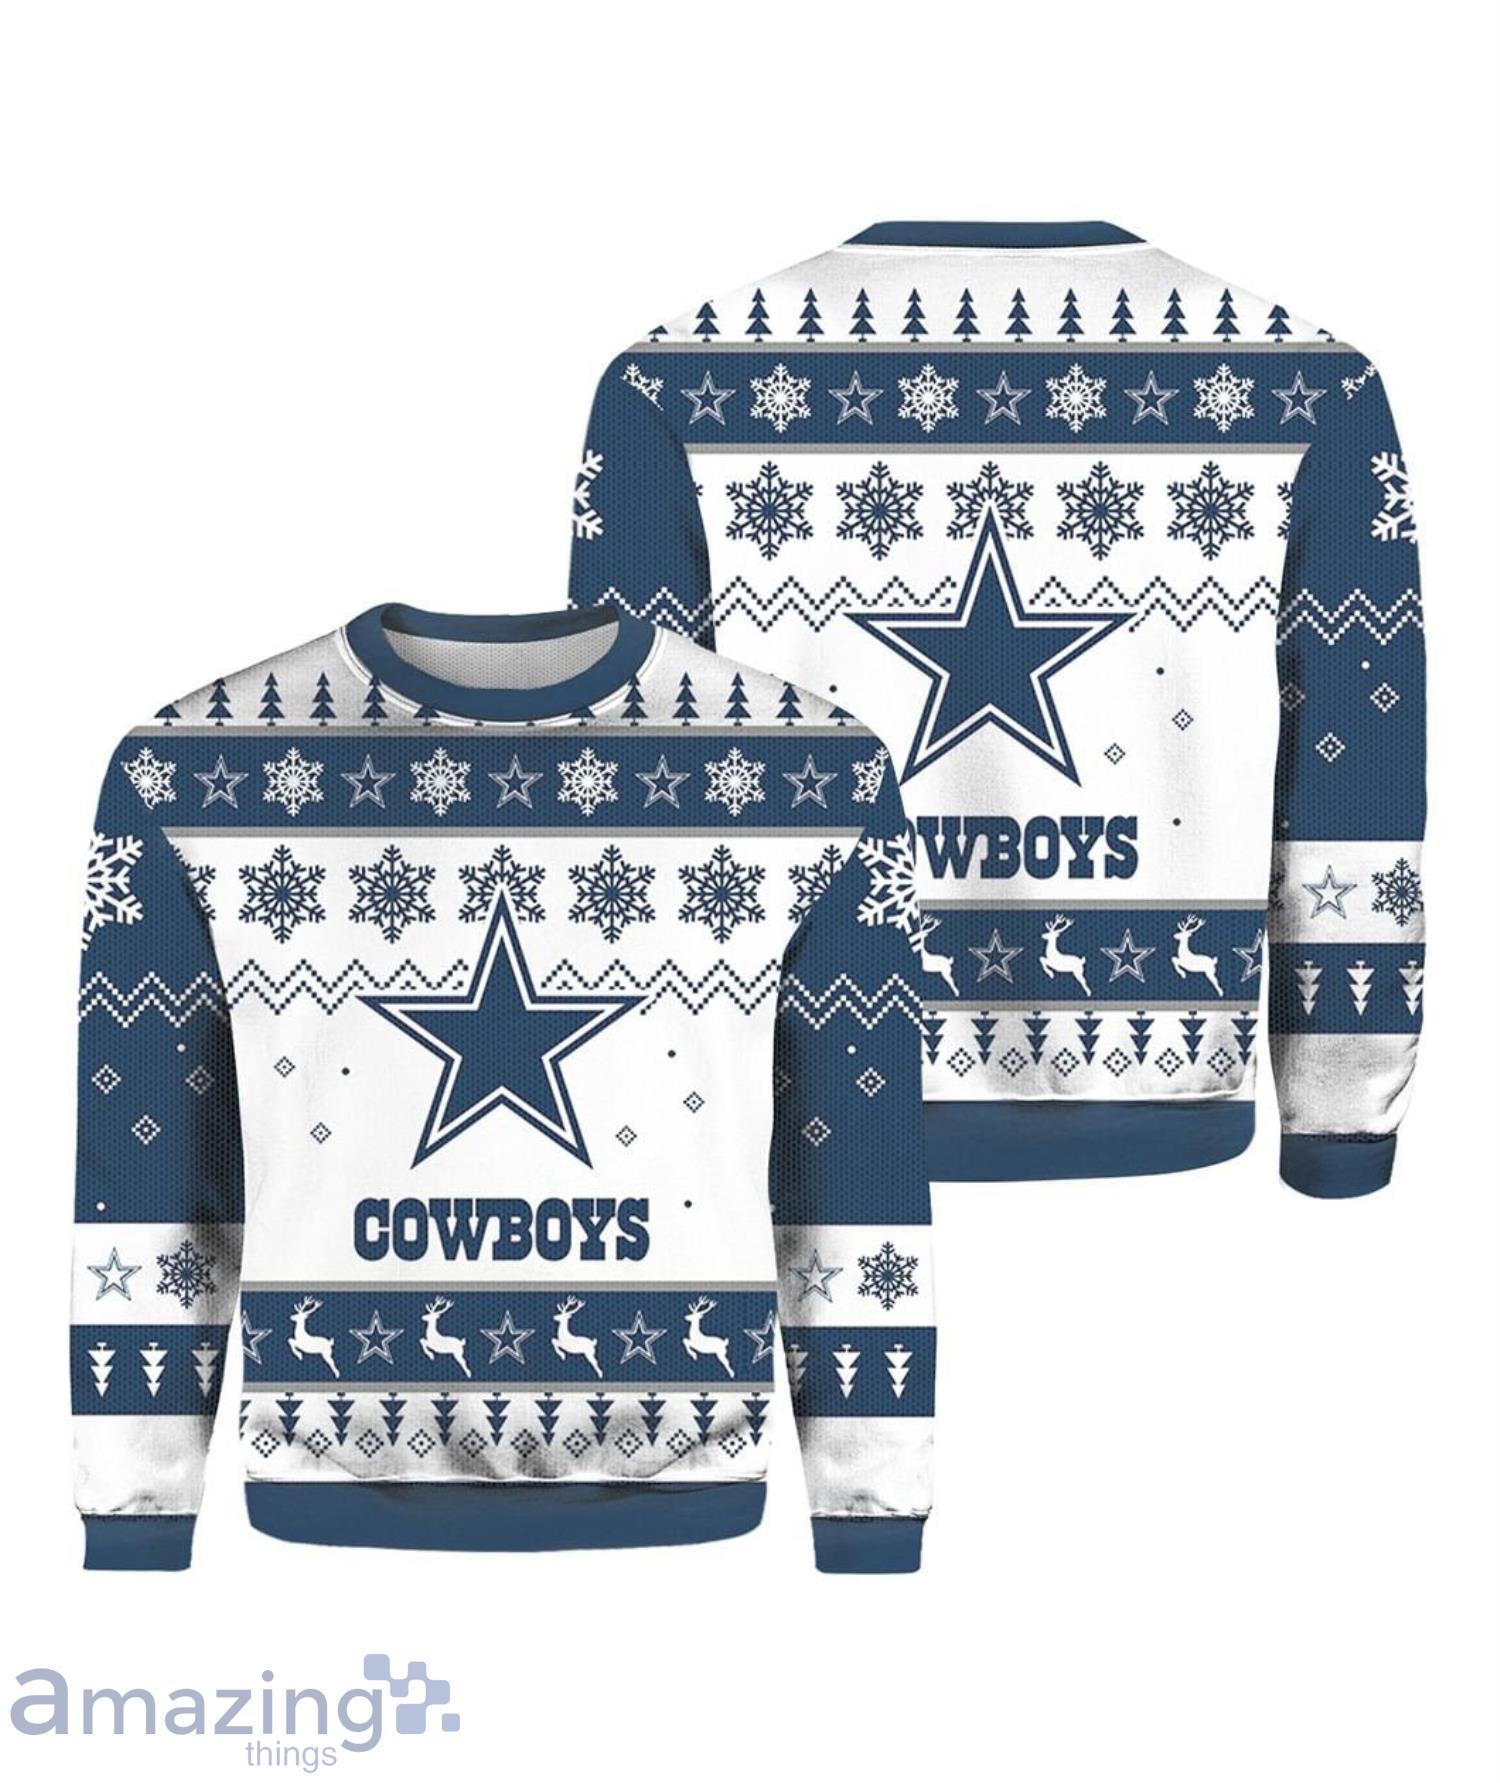 3D Print Dallas Cowboys Sweater NFL Fans Ugly Christmas Sweater